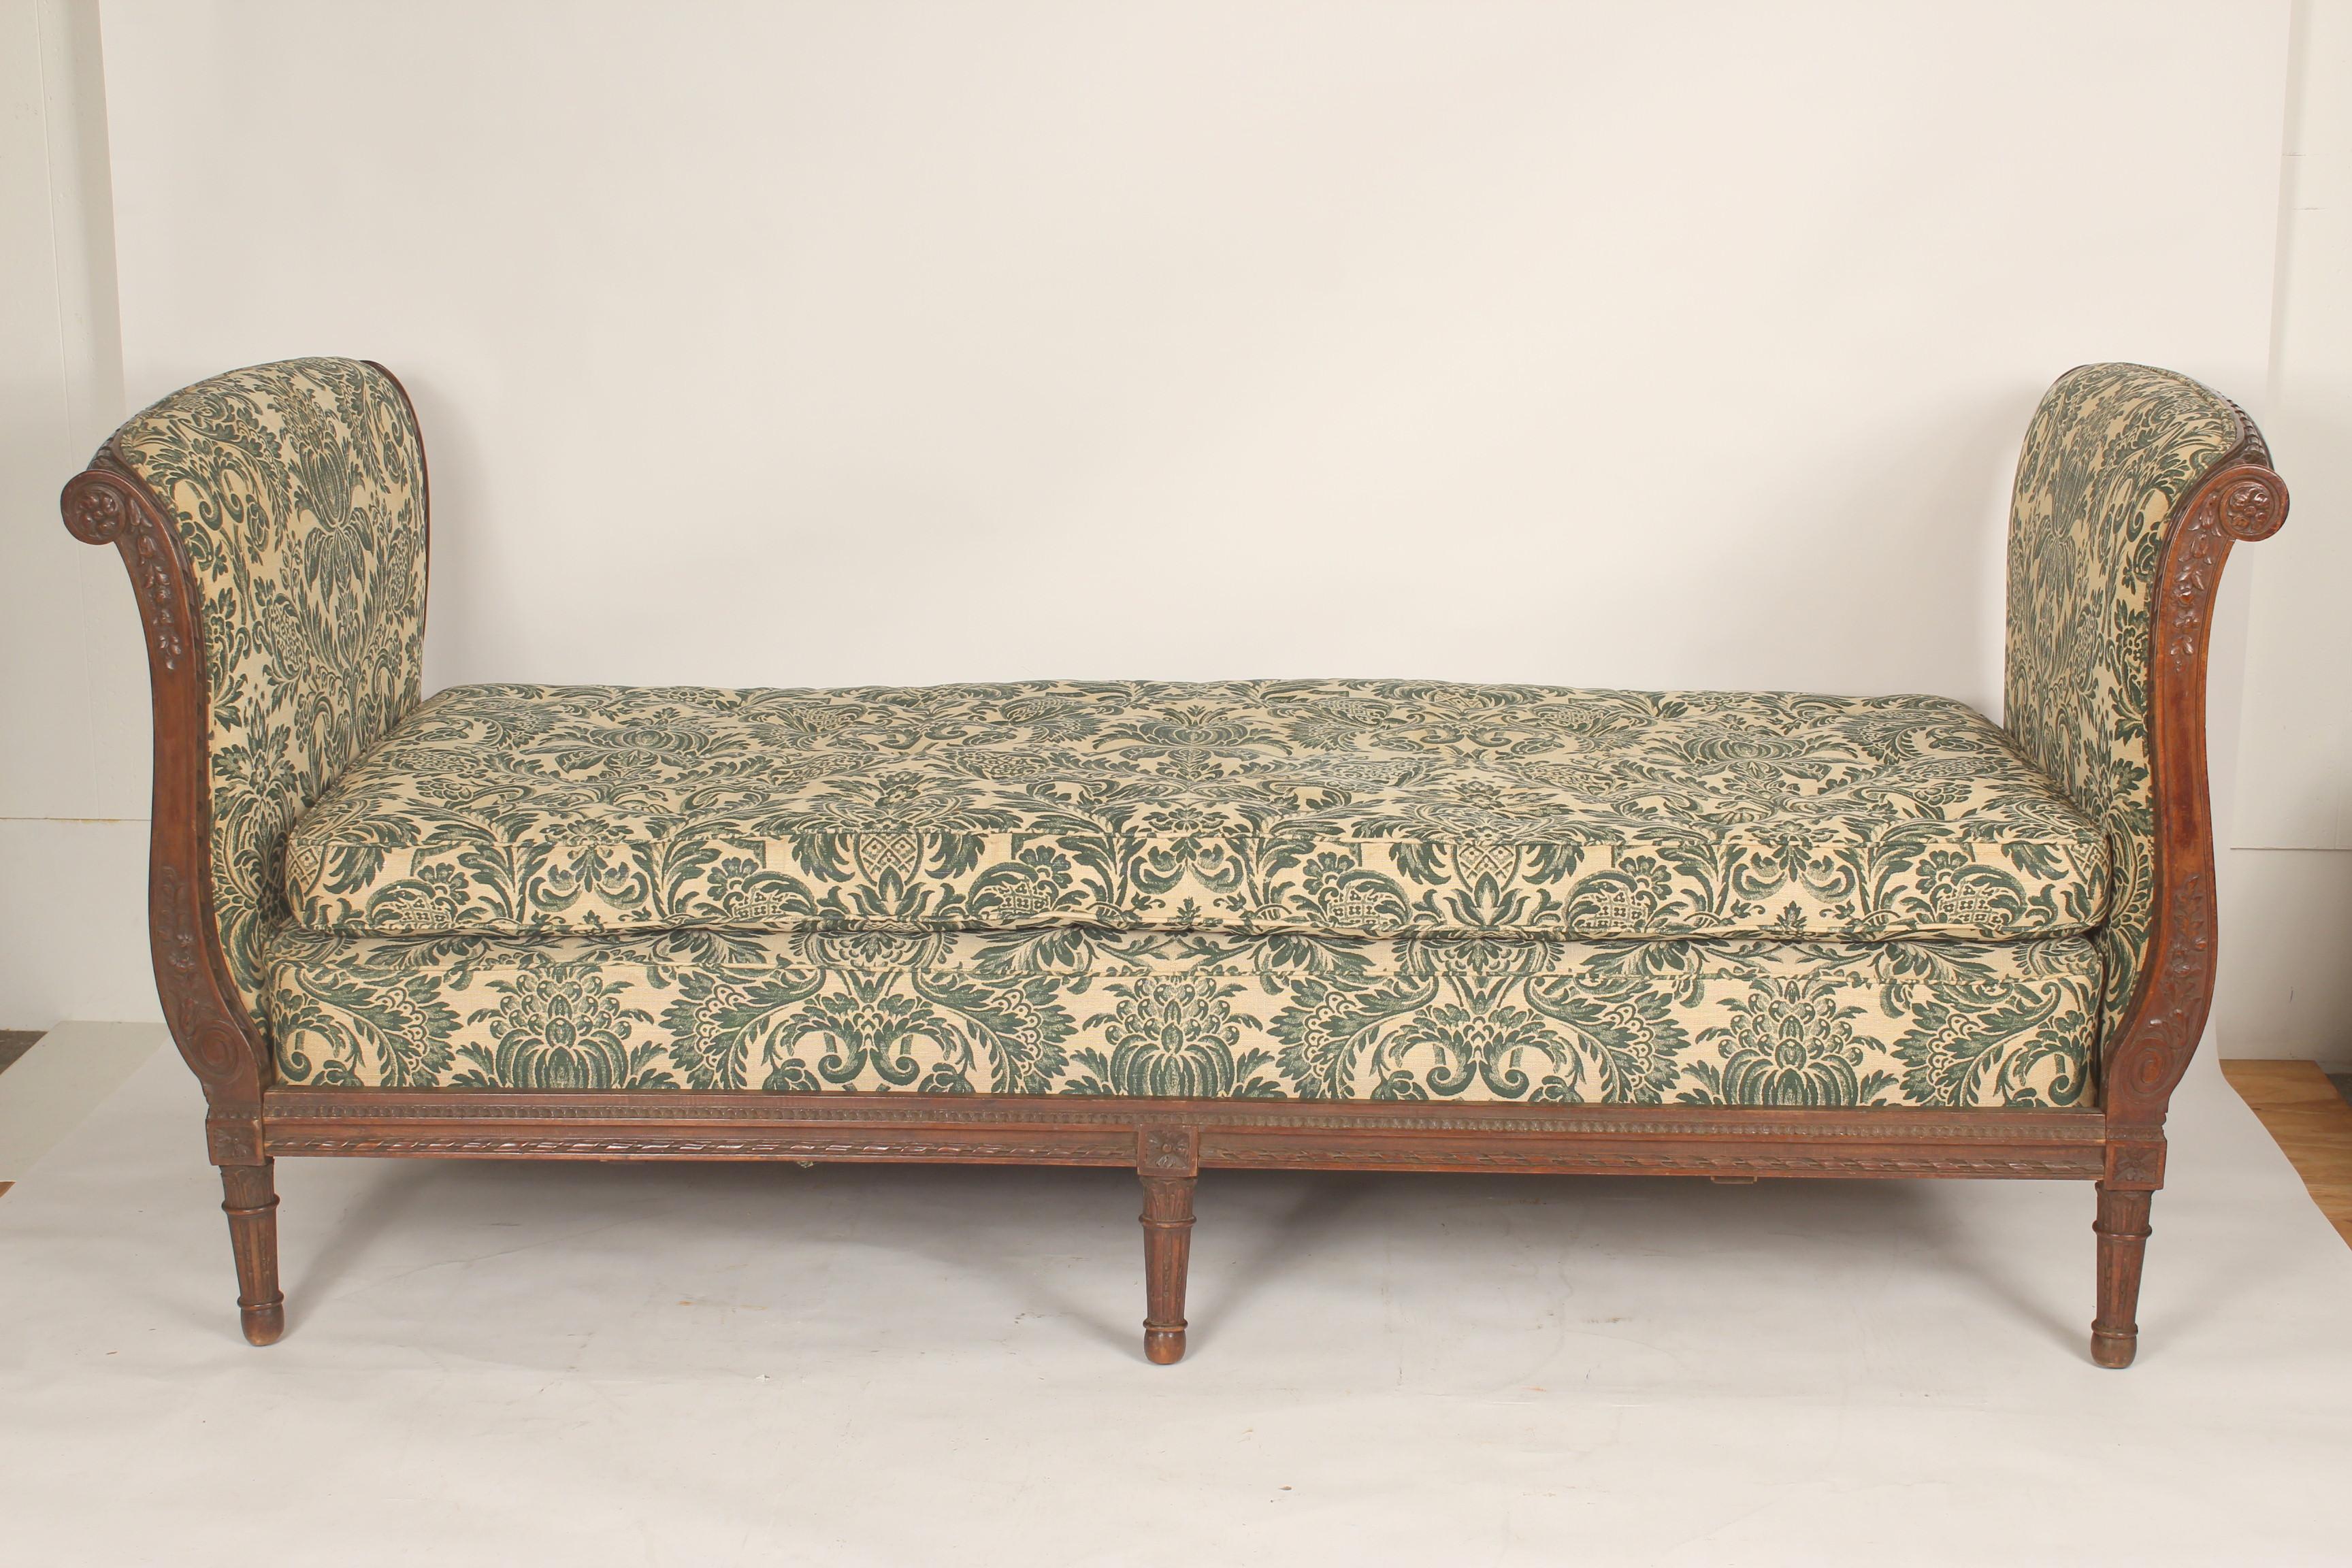 Antique Louis XVI style carved oak daybed, 19th century. Nicely carved oak frame, good patina to the oak bed frame and vintage upholstery. I believe the stuffing in the mattress is straw. The mattress size is 32